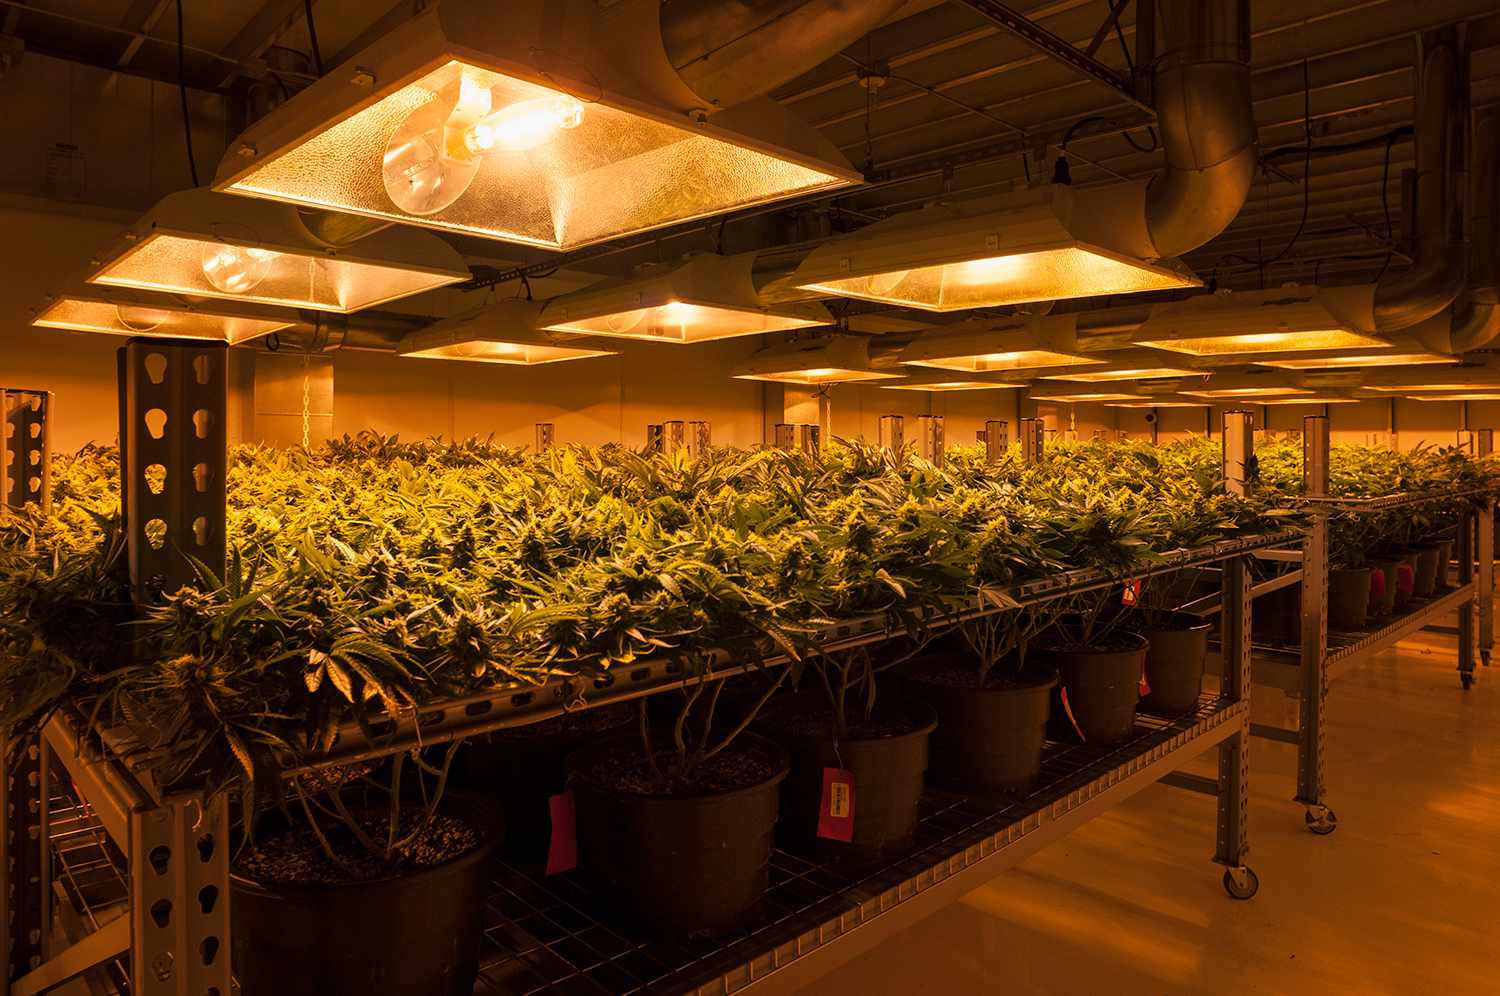 artificial lights help in plant growth